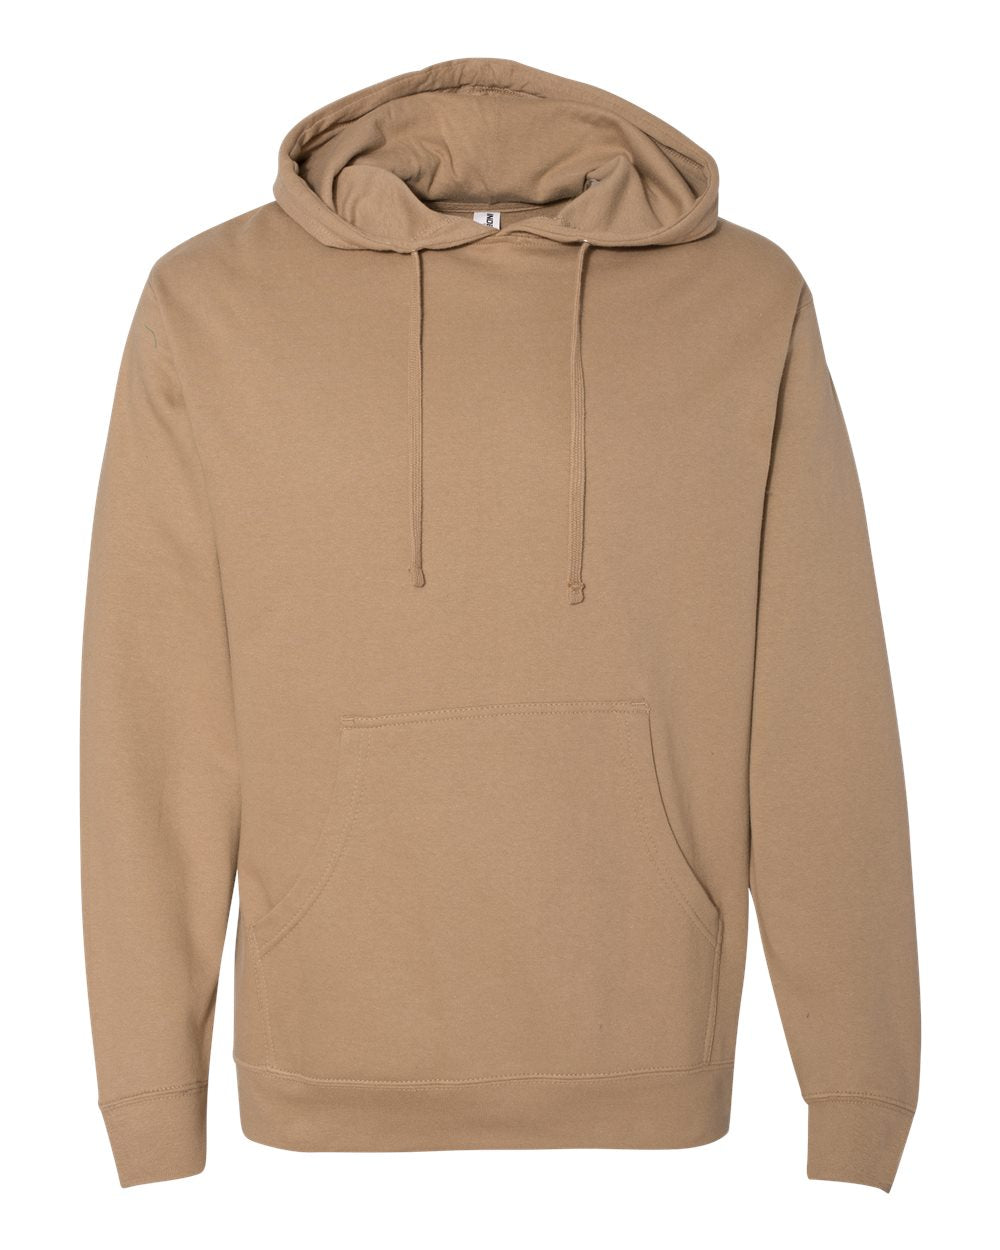 Independent Trading Co. Midweight Hooded Sweatshirt SS4500 #color_Sandstone